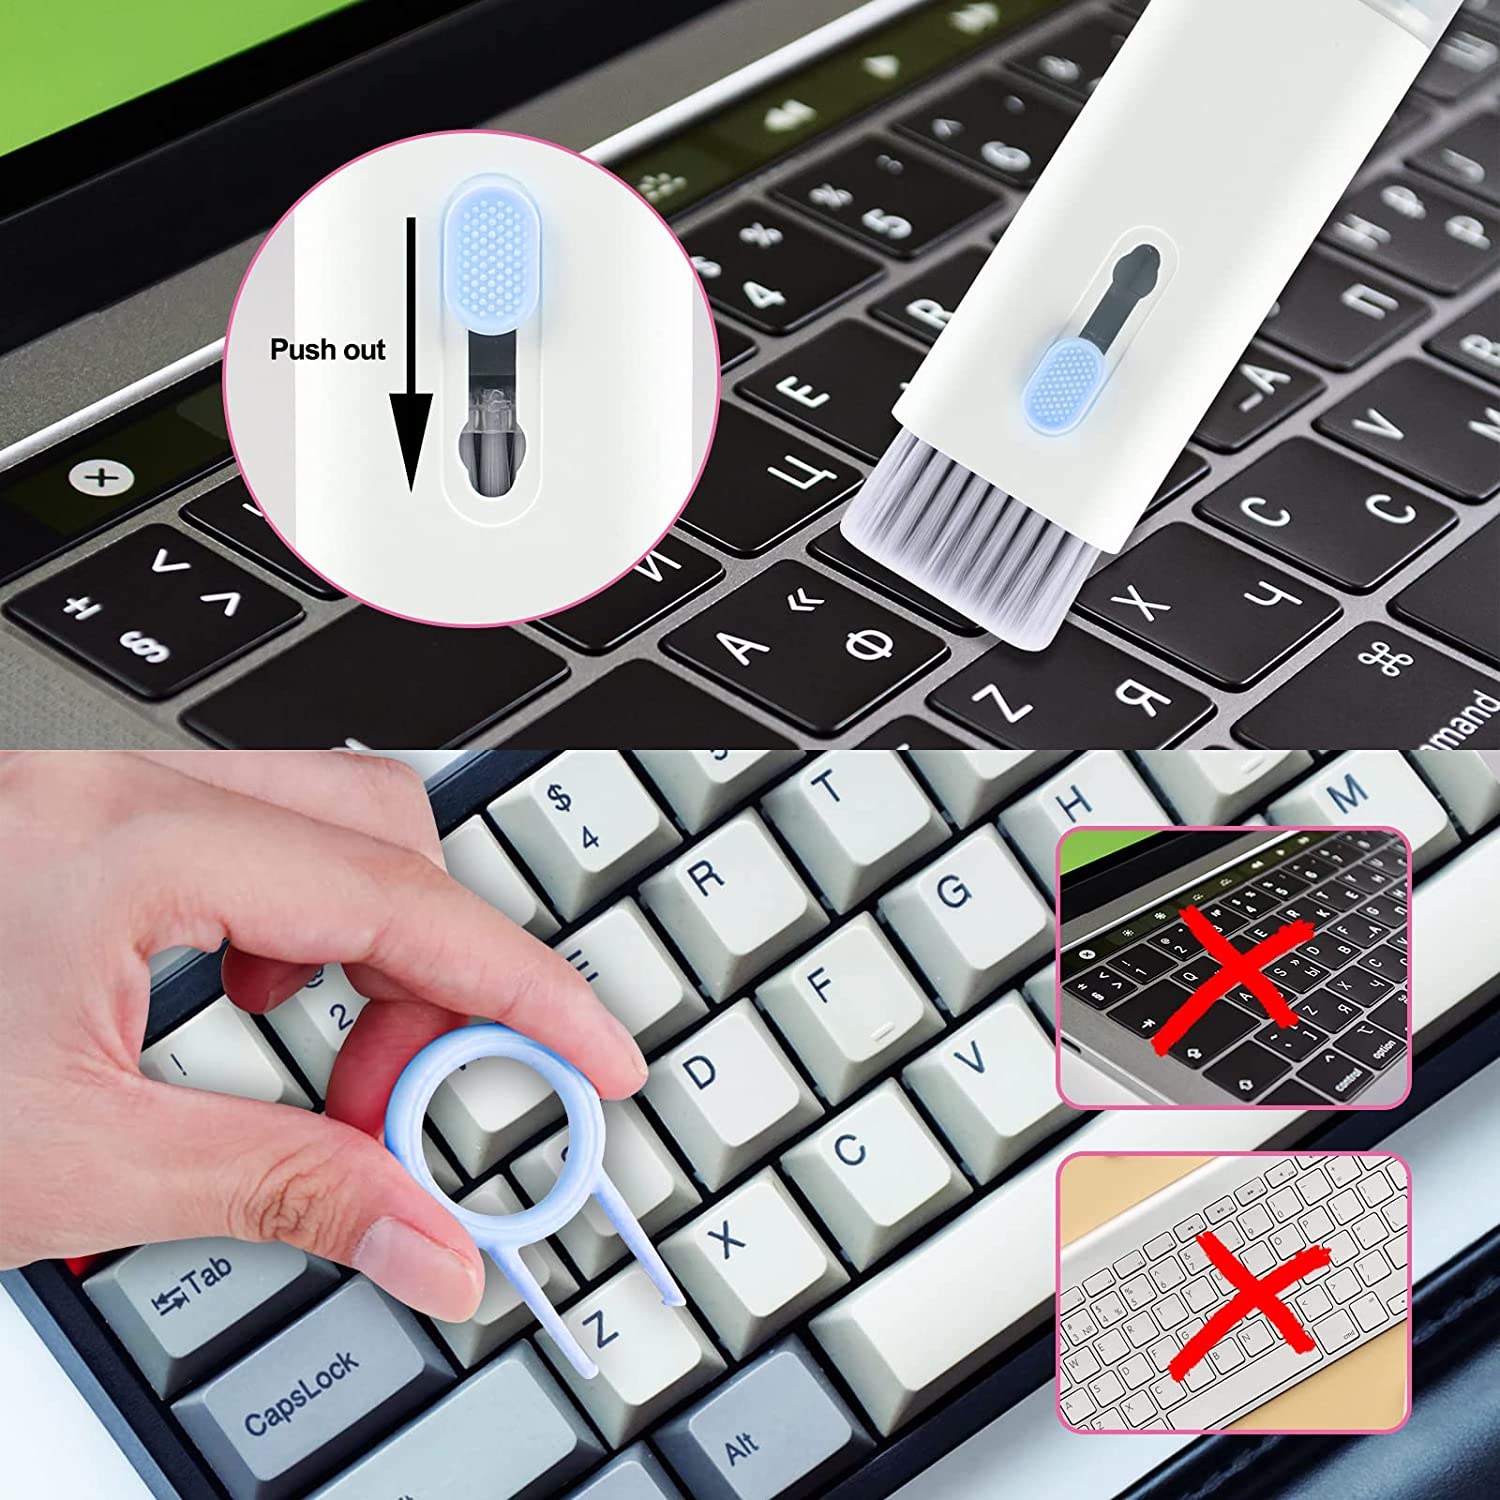 Keyboards-7-in-1-Keyboard-Cleaner-Kit-Earbunds-Cleaner-Portable-Electronic-Cleaning-Tool-for-PC-Monitor-Earbud-Cell-Phone-Laptop-Computer-Earphone-Blue-31